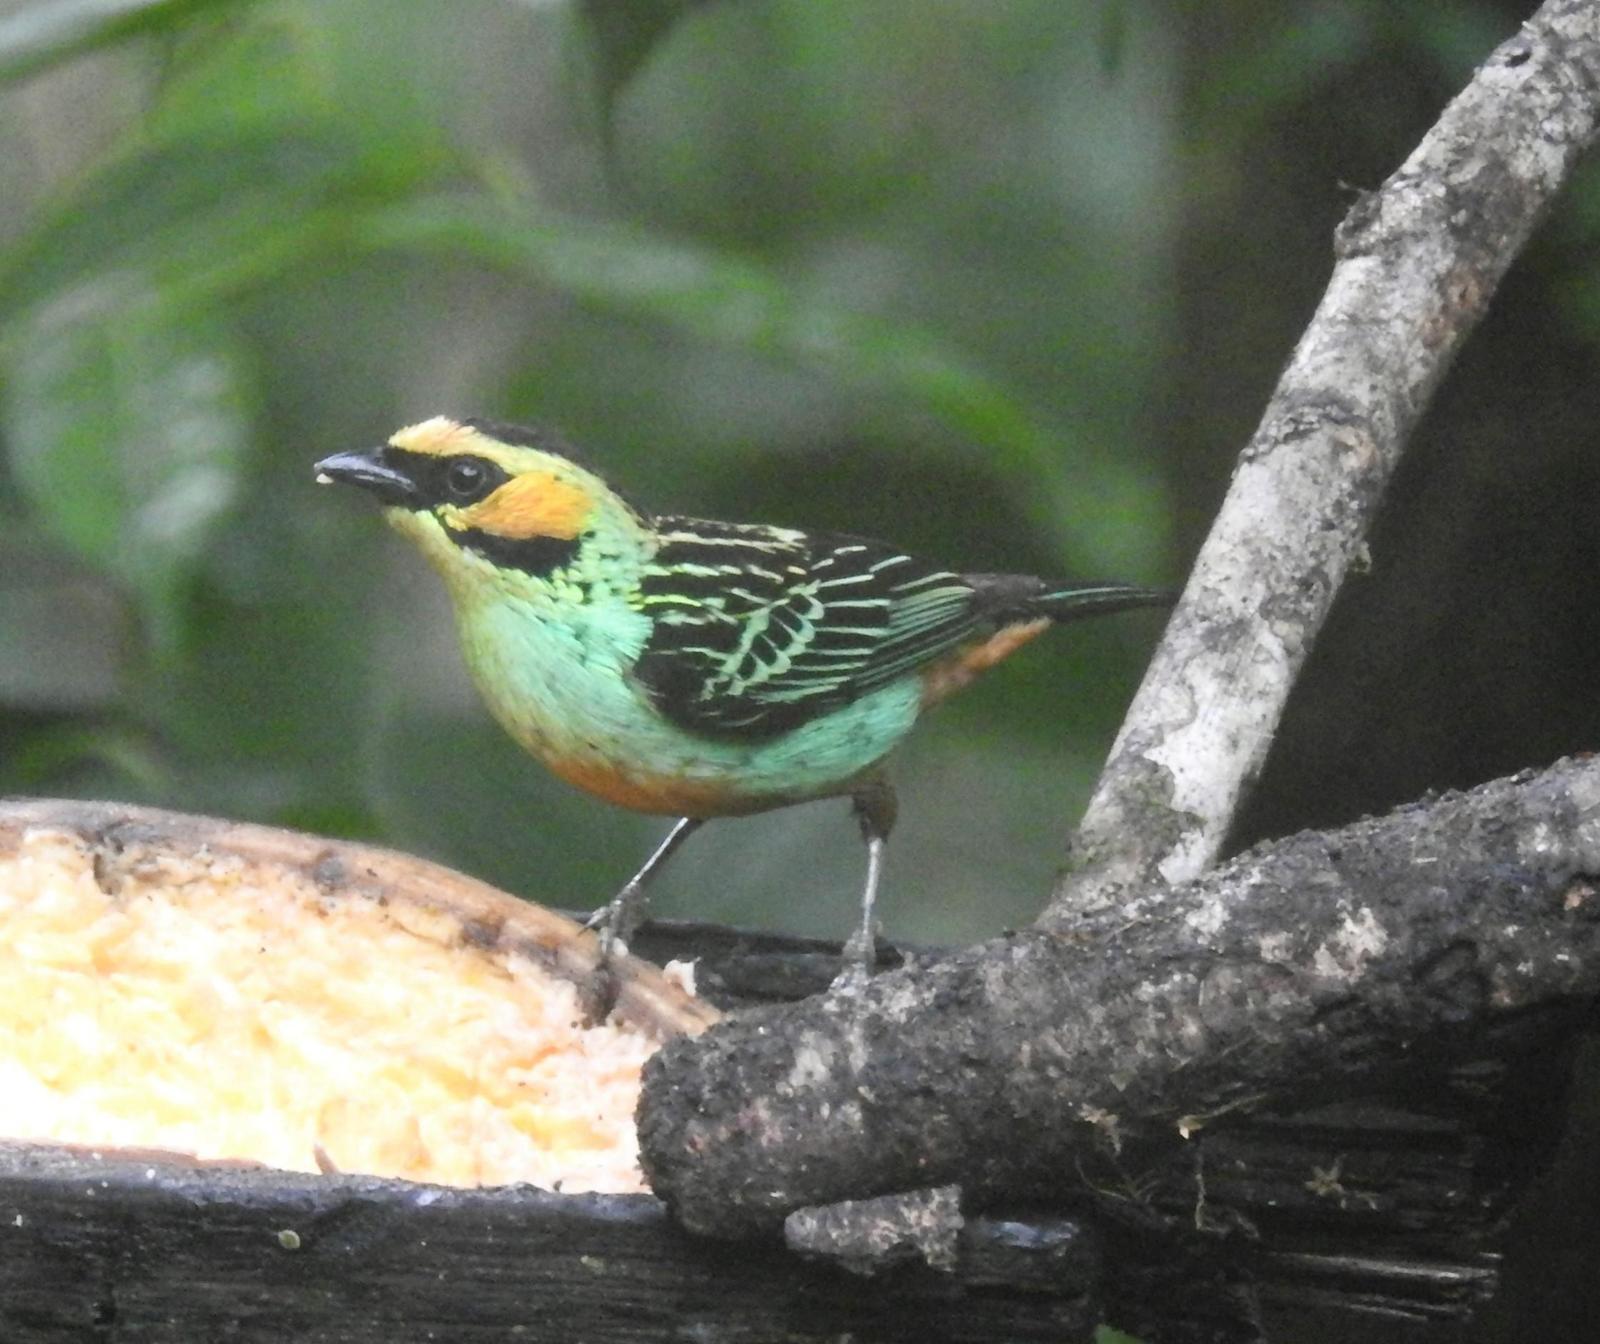 Golden-eared Tanager Photo by John Licharson